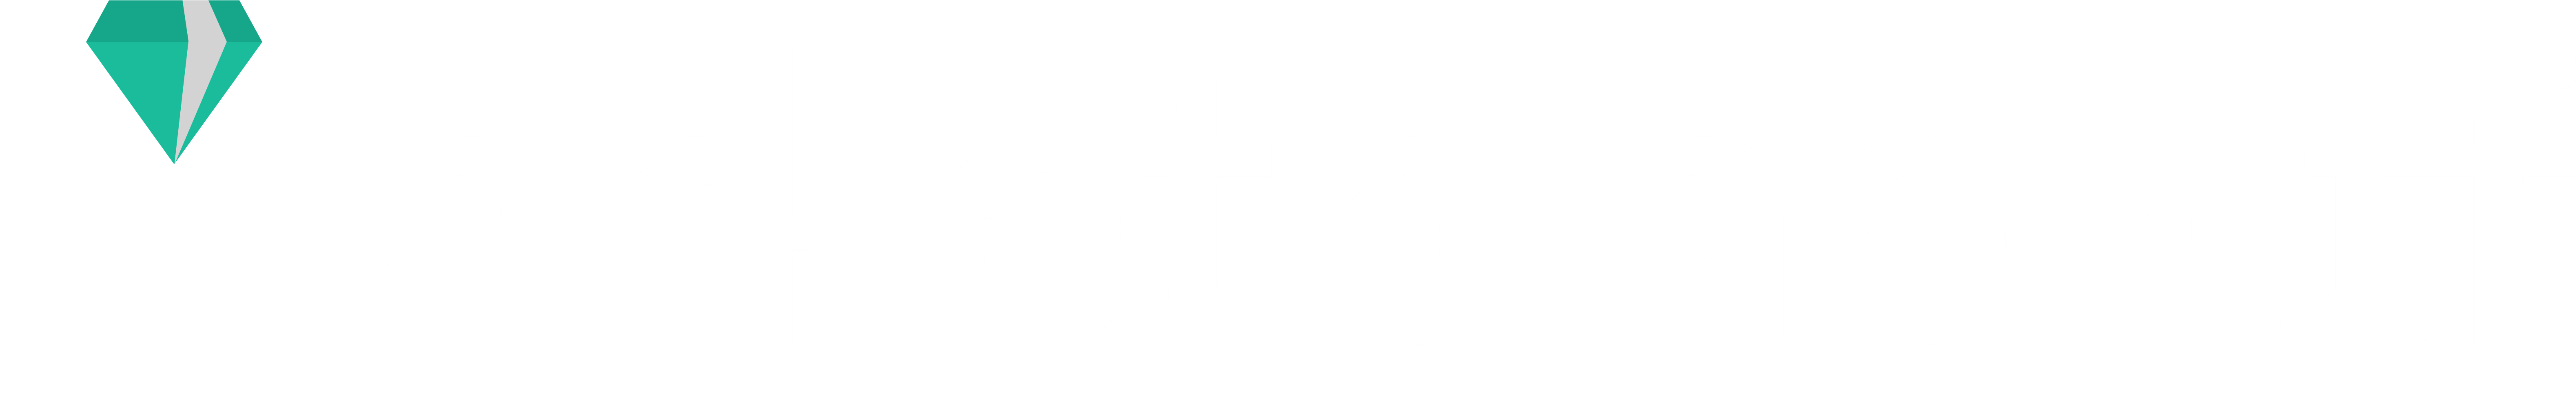 Marketplace T F2 Logo PNG